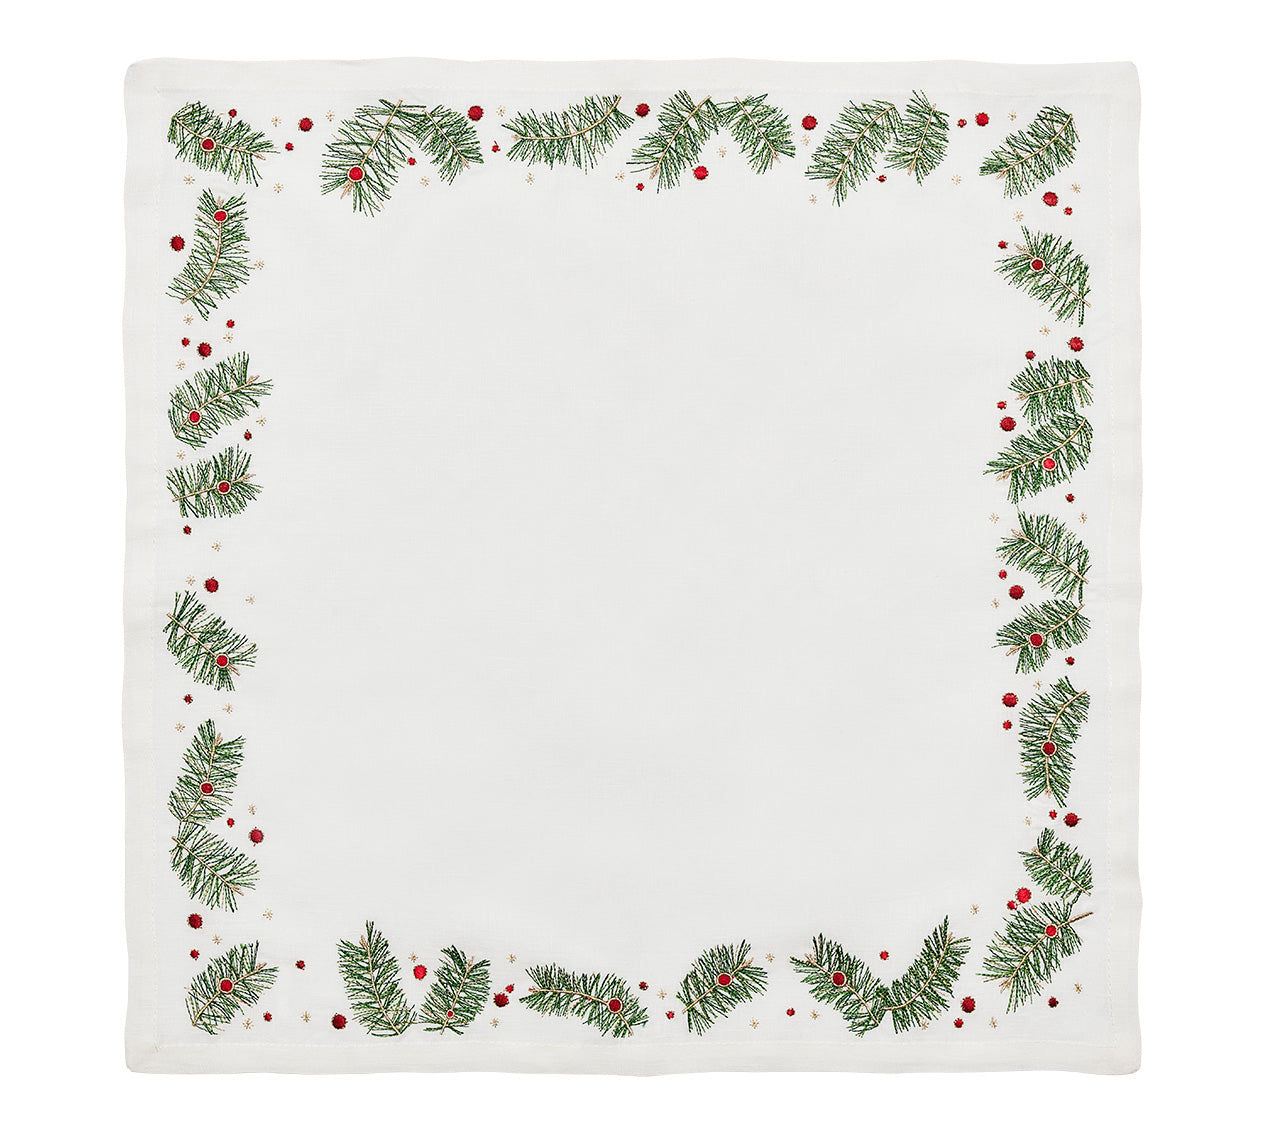 Evergreen Napkin in White, Red & Green, Set of 4